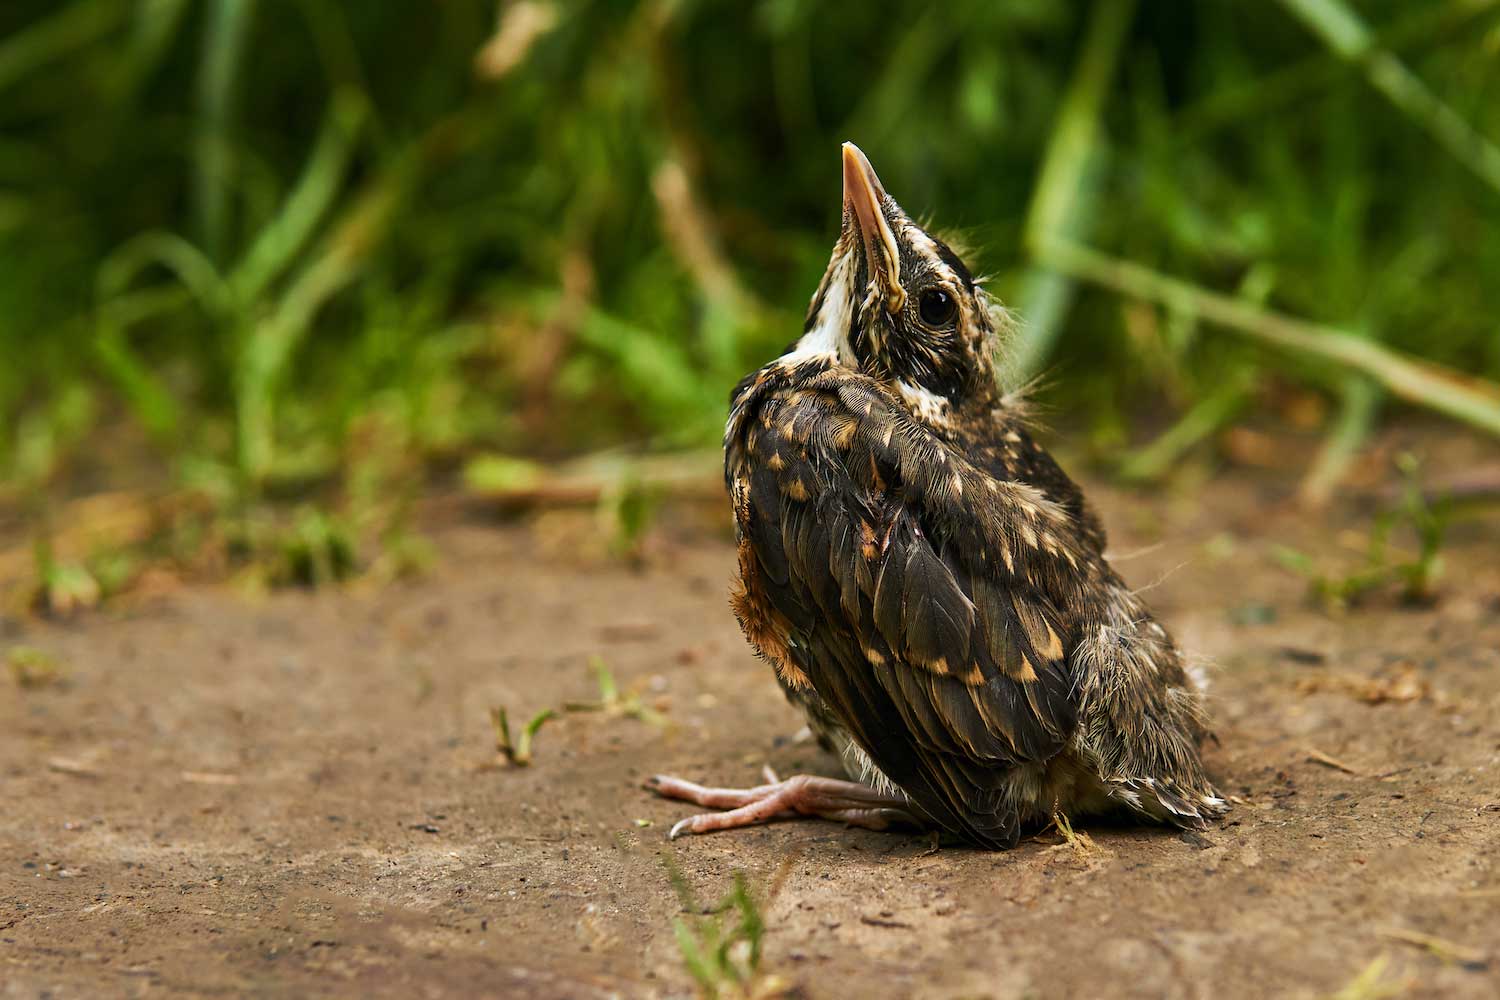 A robin fledgling on the ground.